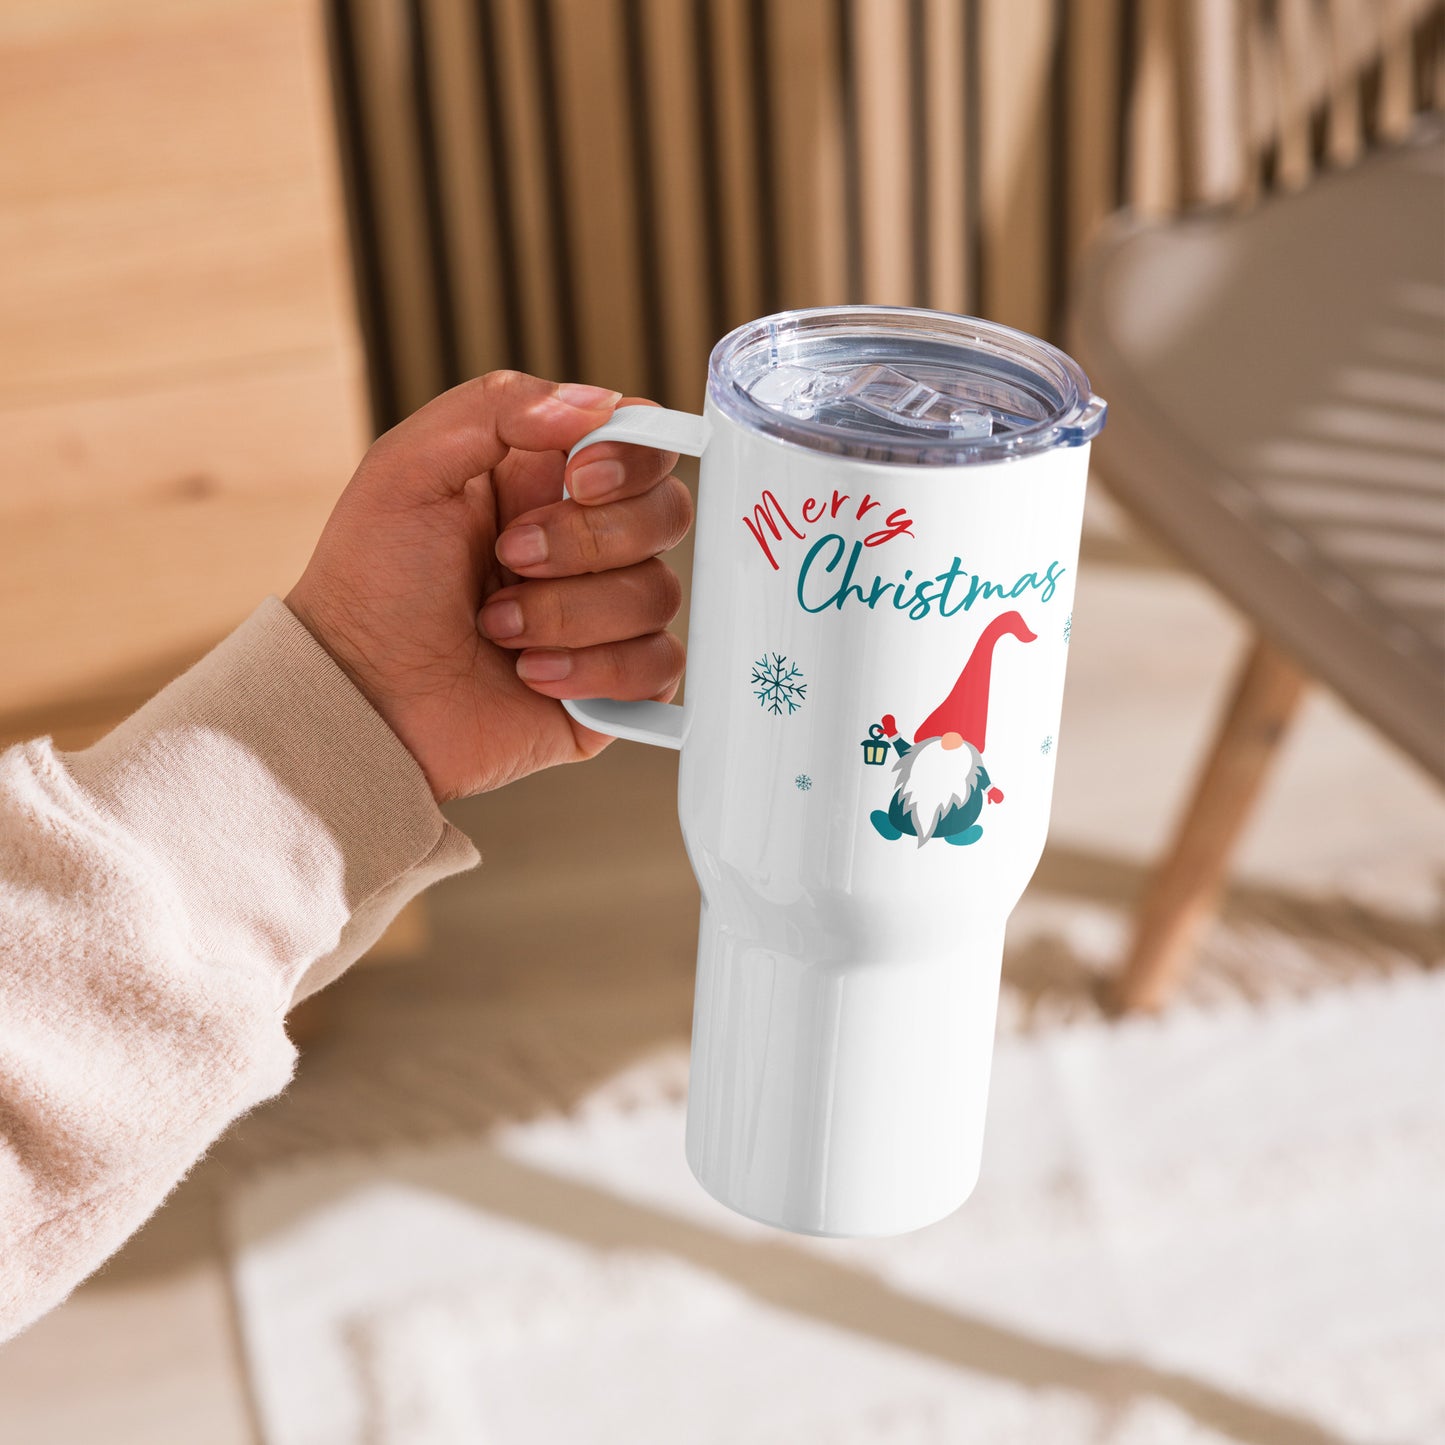 Merry Christmas thermos with handle